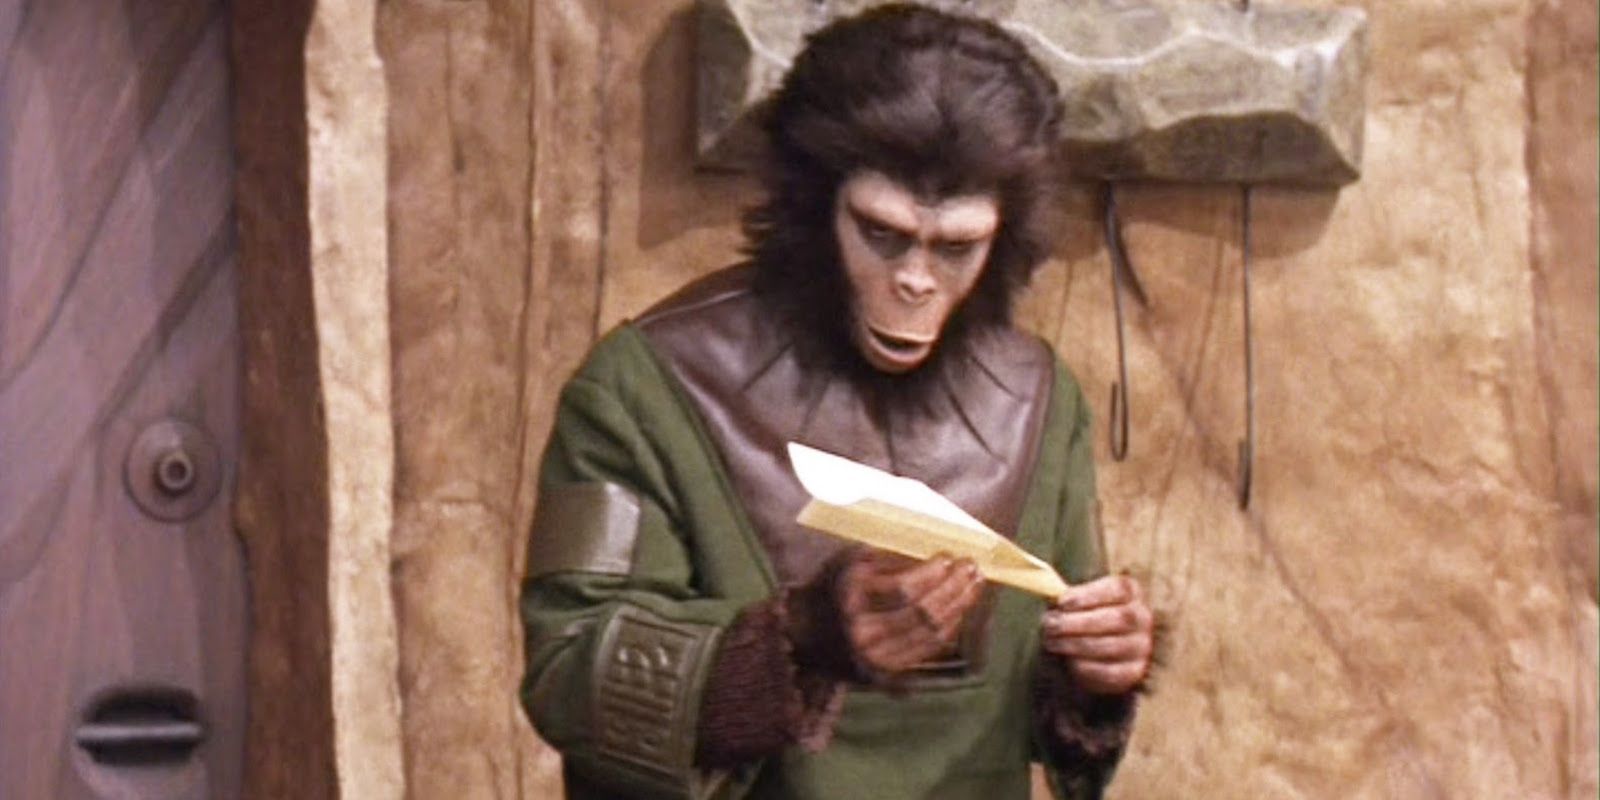 Lisa with a paper airplane in Battle for the Planet of the Apes.